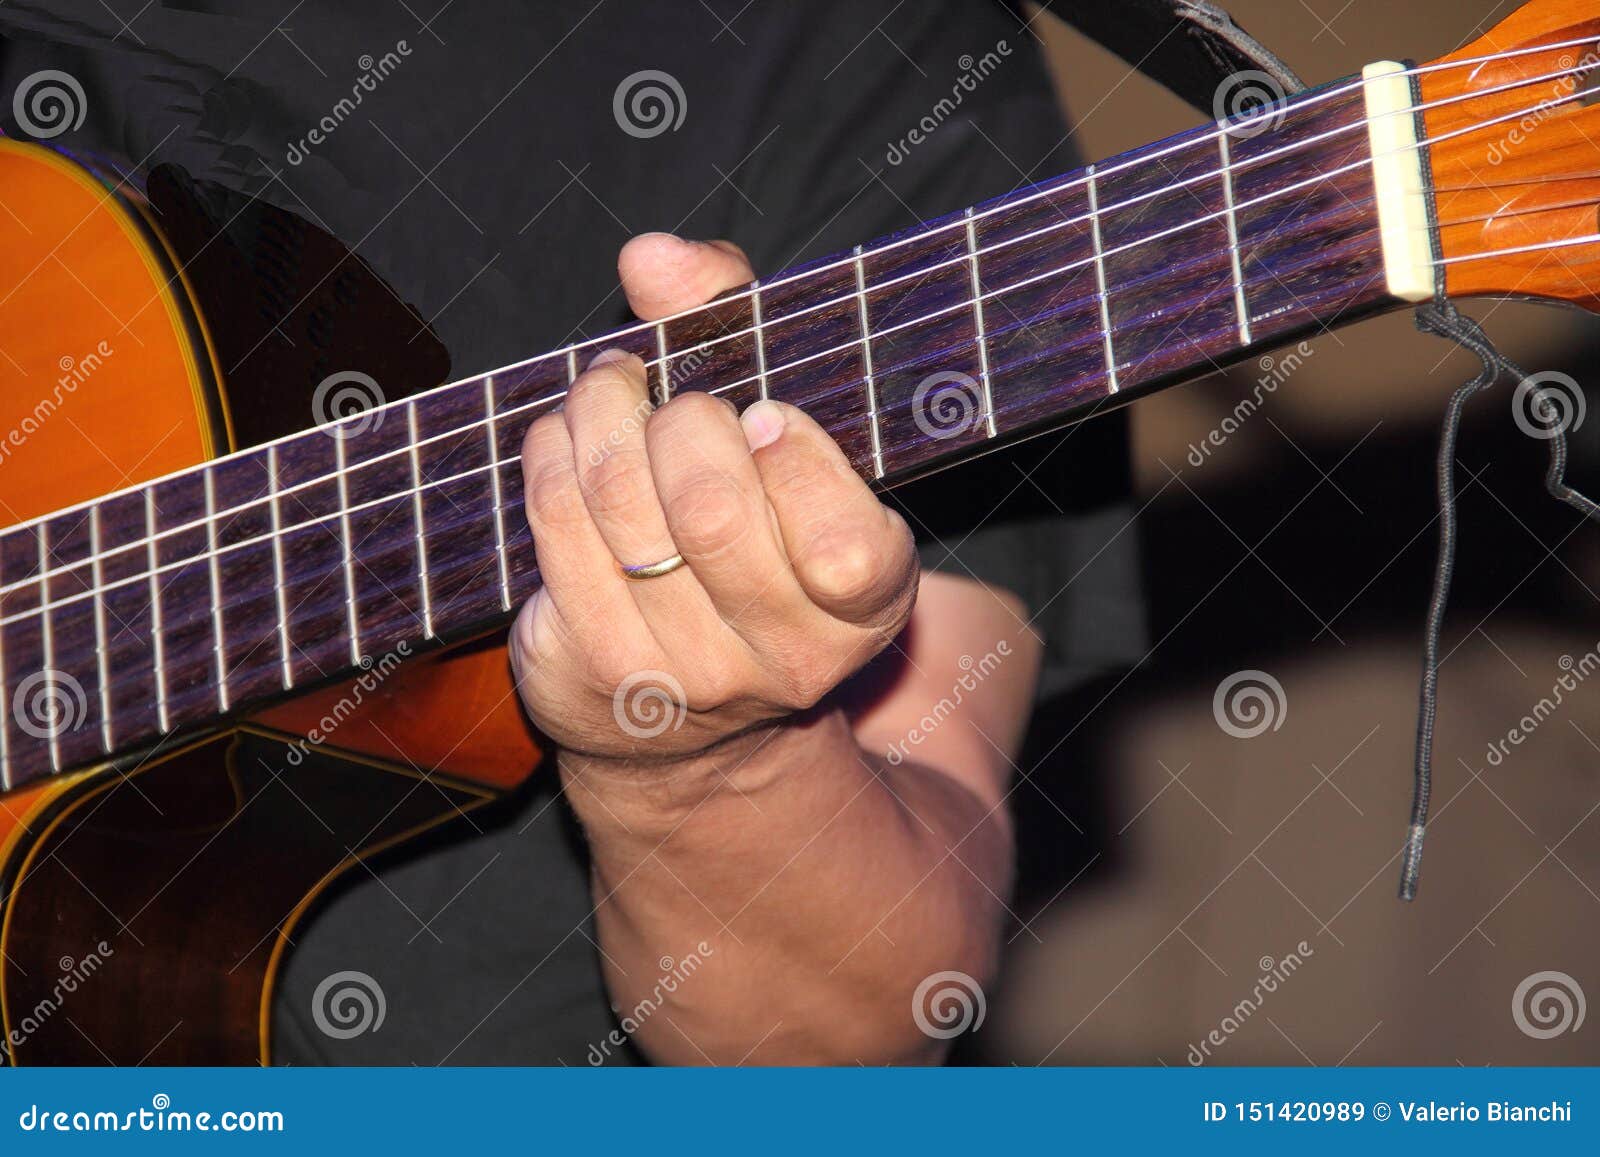 the hands of the guitarist make the strings of the instrument vibrate